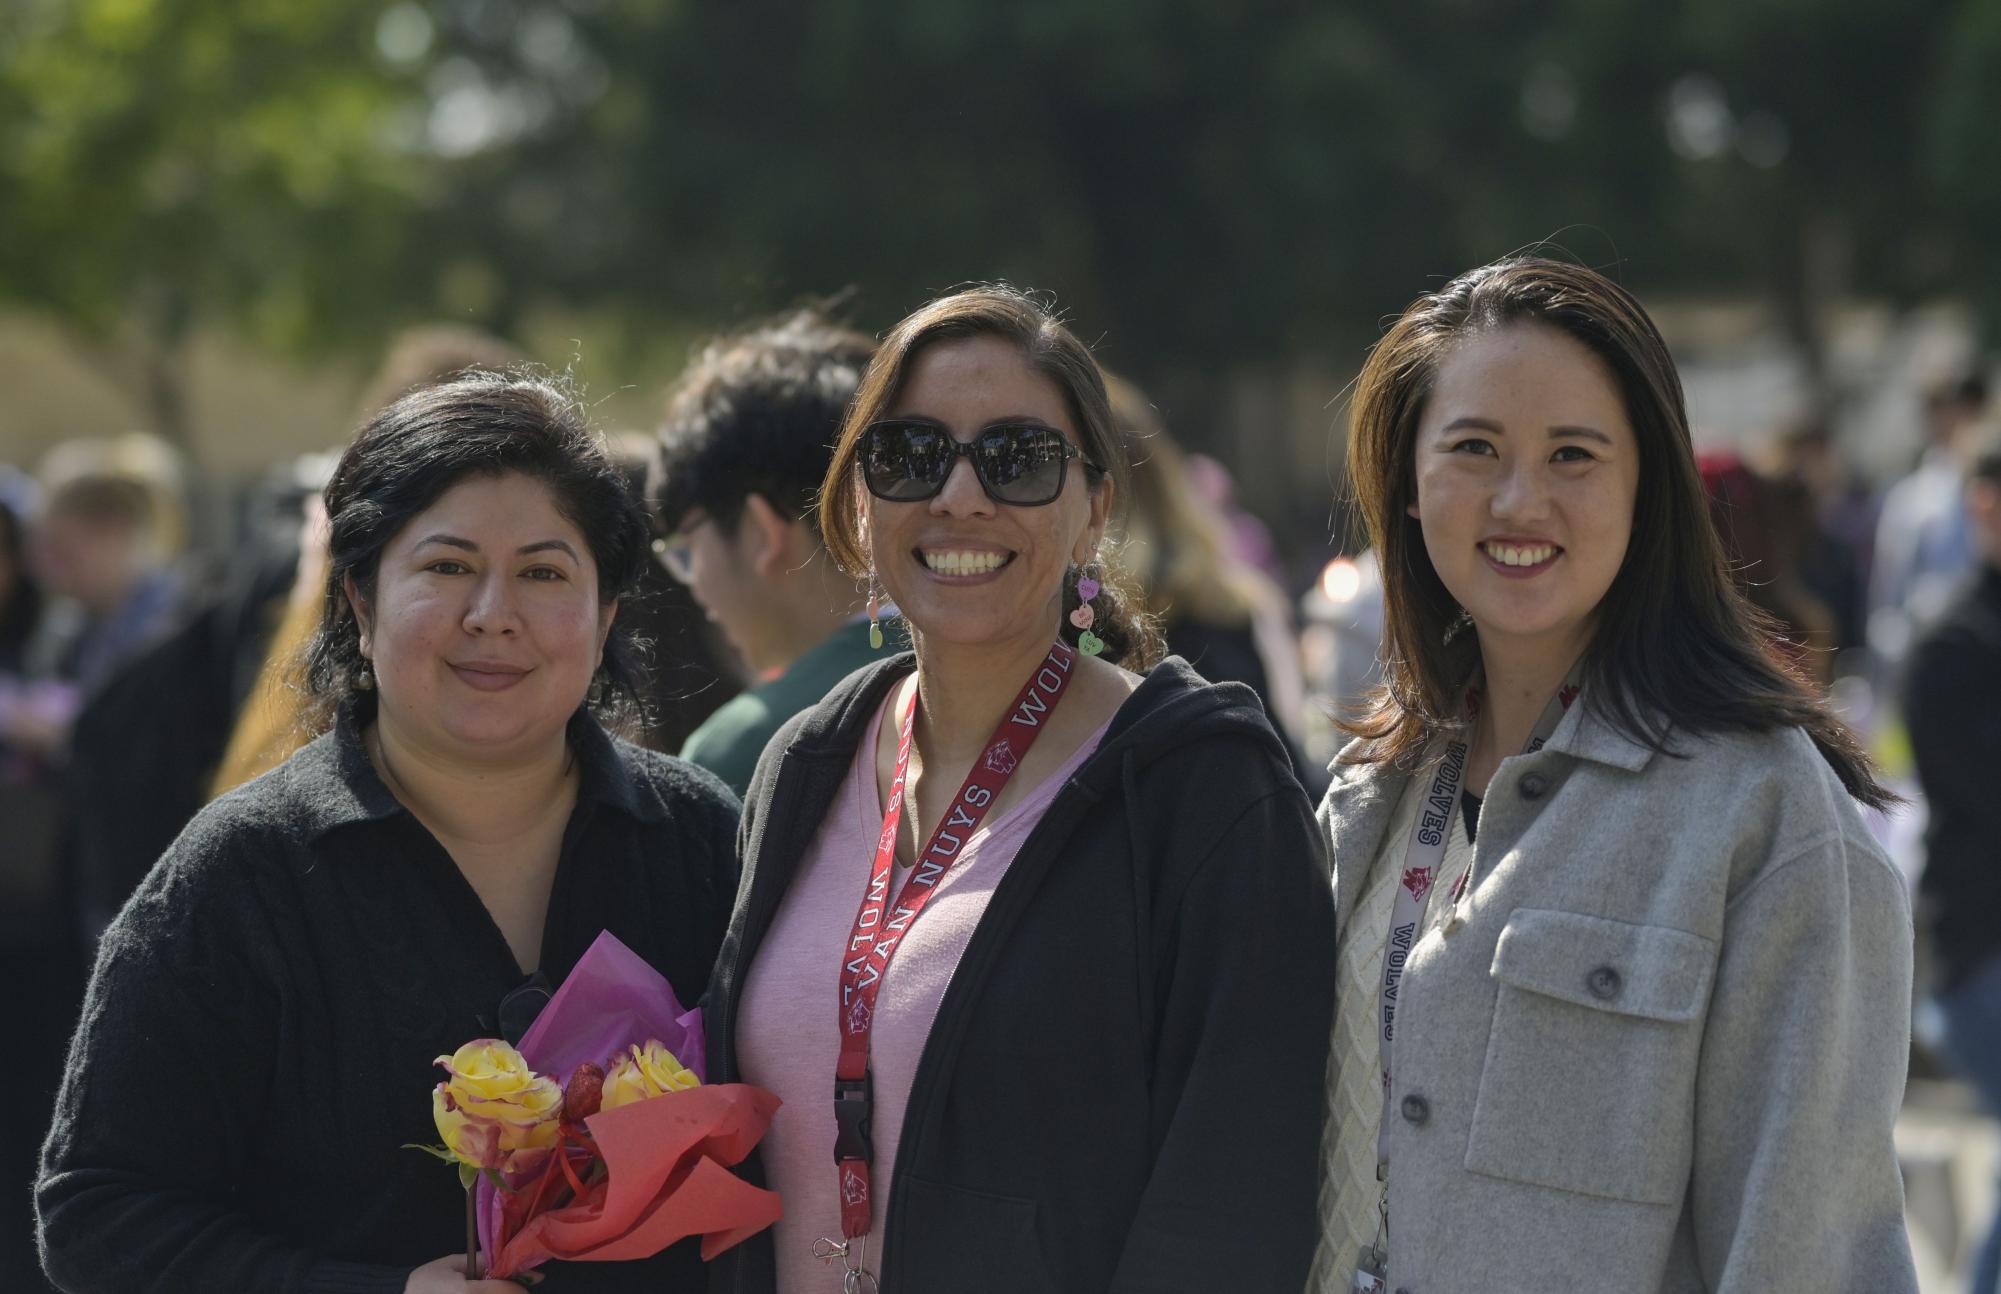 From L to R: Ms. Milagro Medrano, Ms. Elizabeth Torres and Ms. Michelle Park hang out on the quad, listening to the fun music and enjoying the vibrant environment.